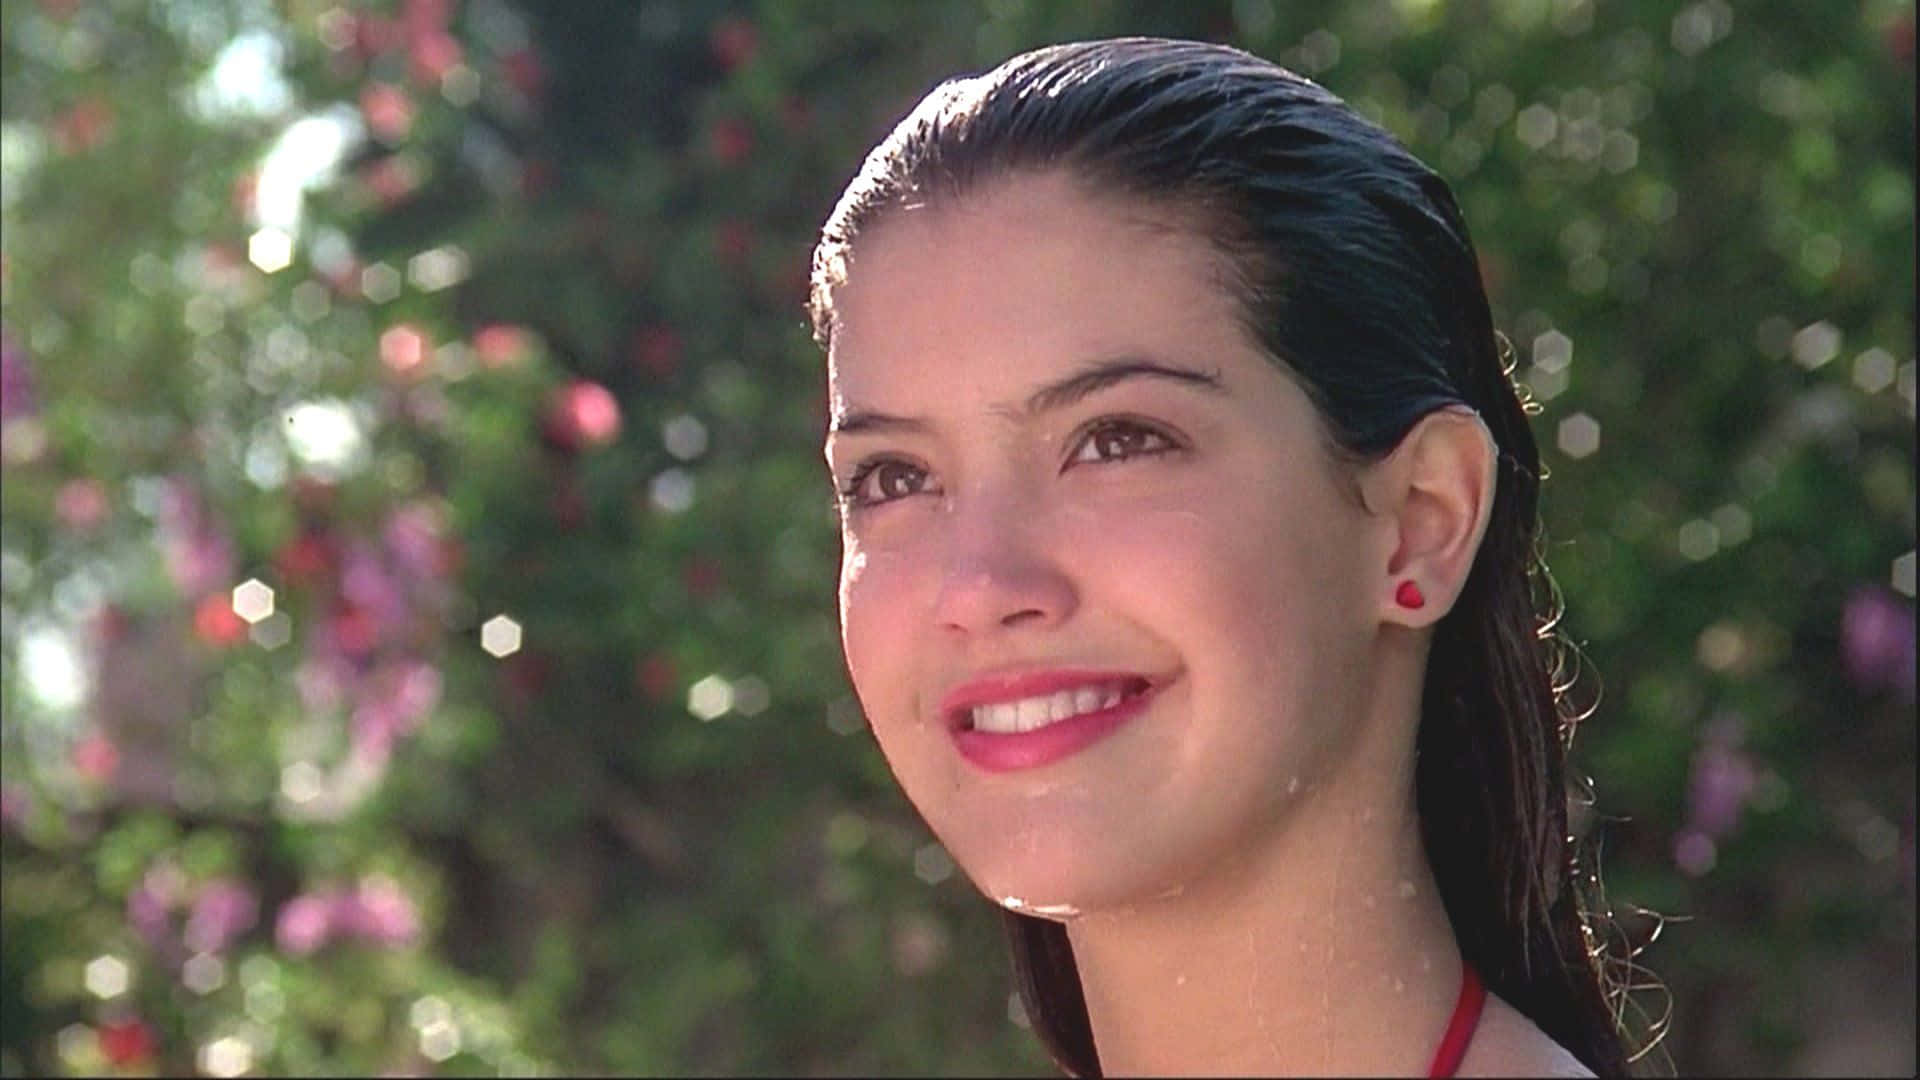 Phoebe Cates Smiling in a Classic Red Dress Wallpaper